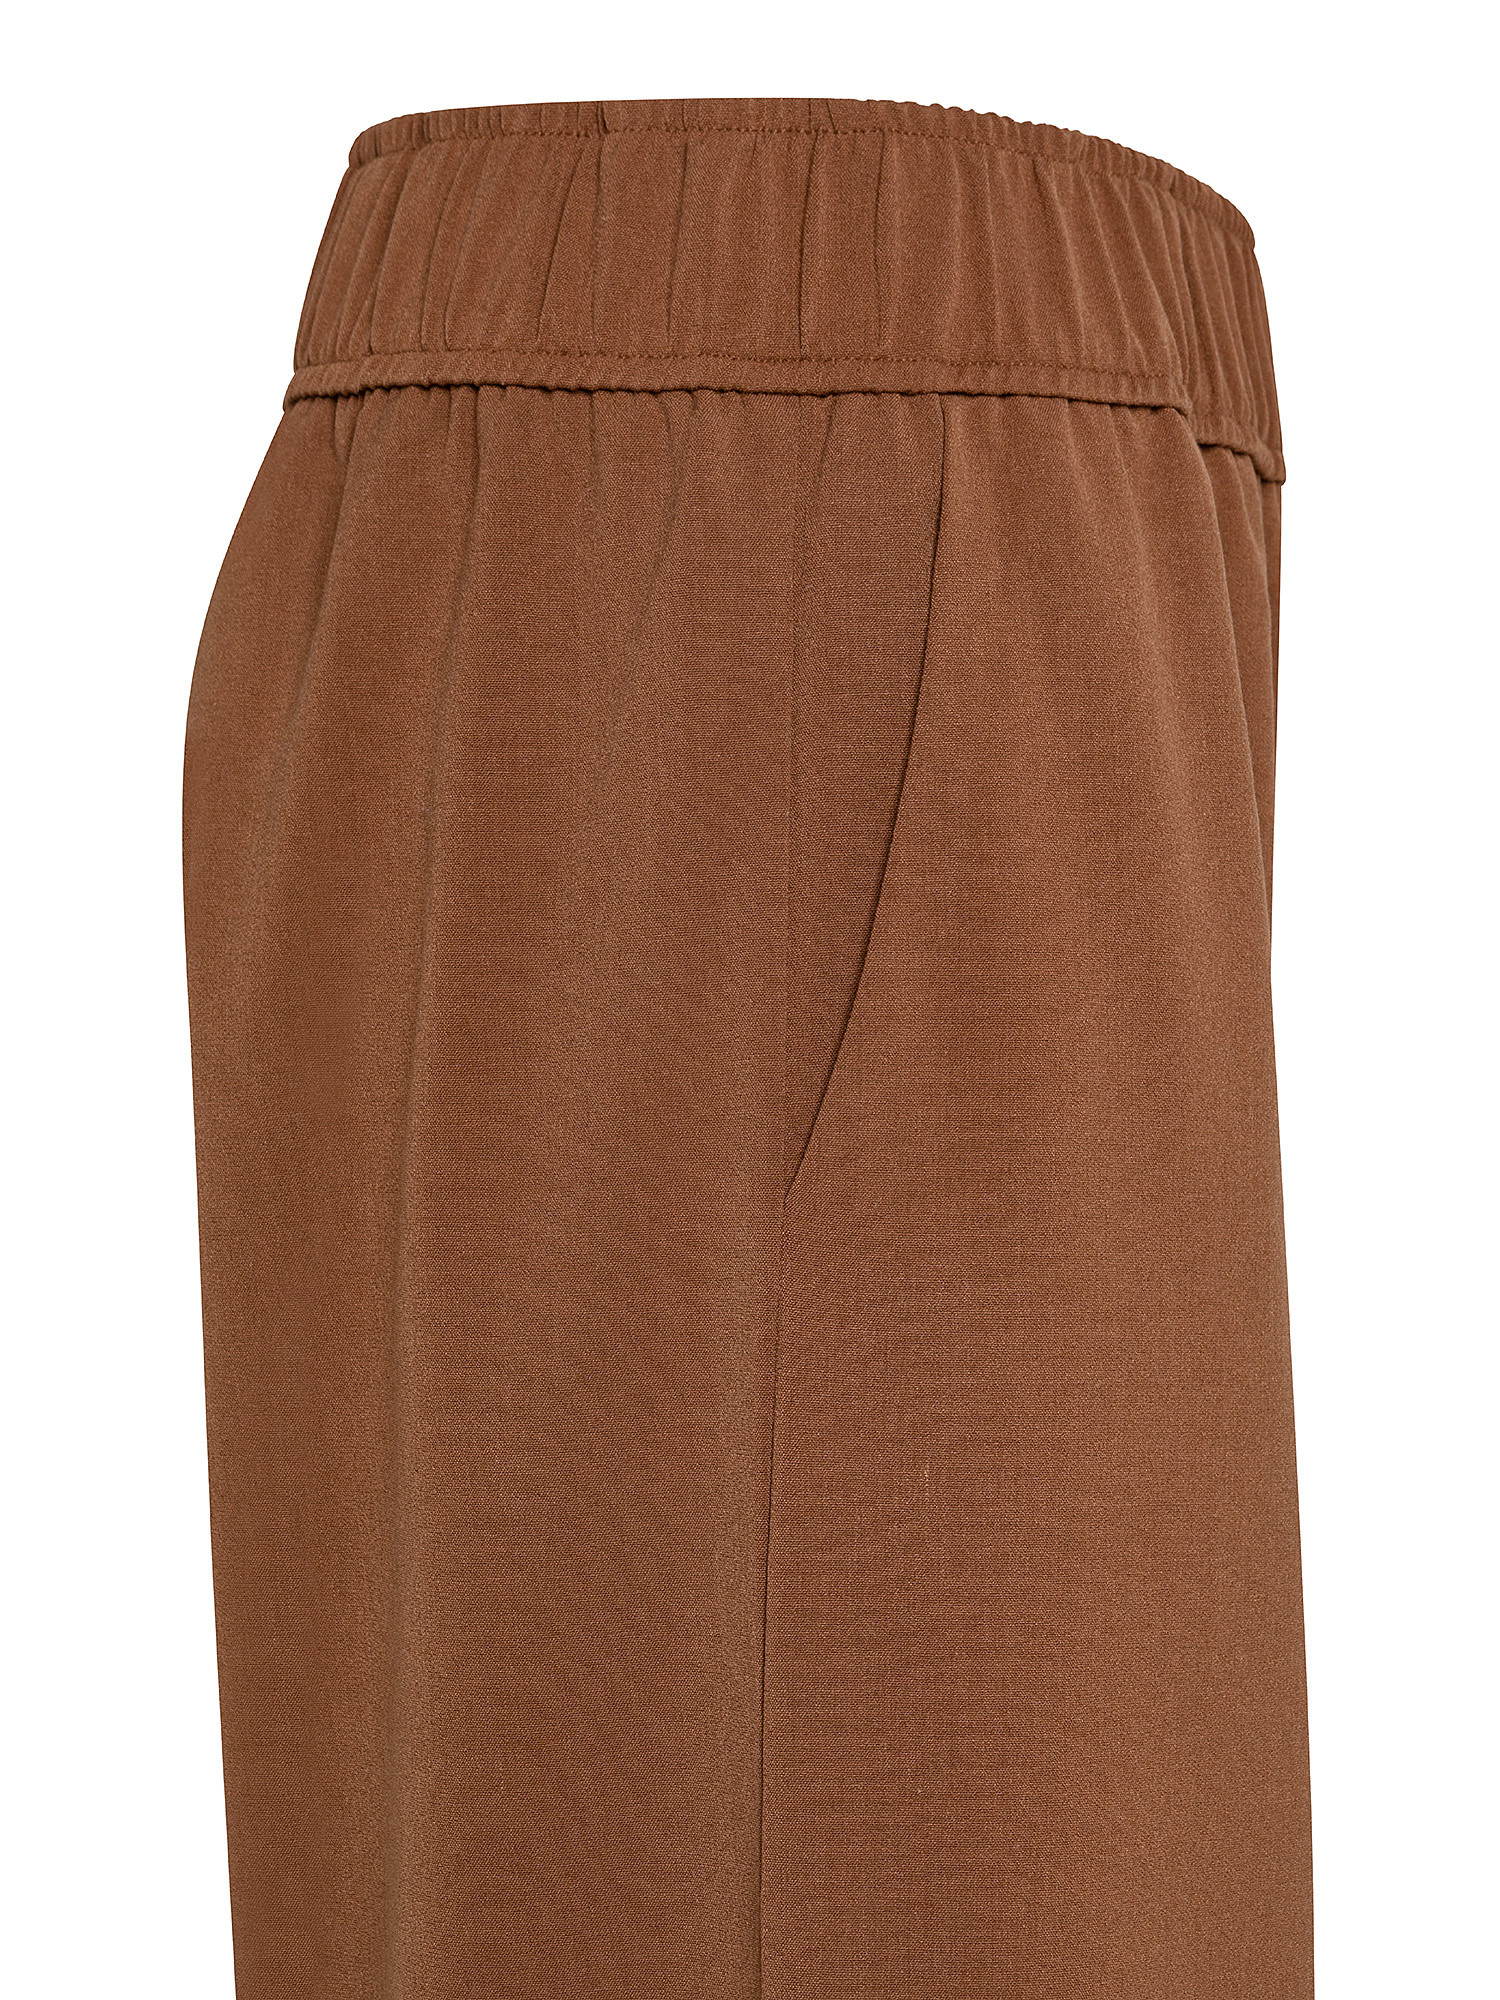 Trousers with wide leg, Brown, large image number 2